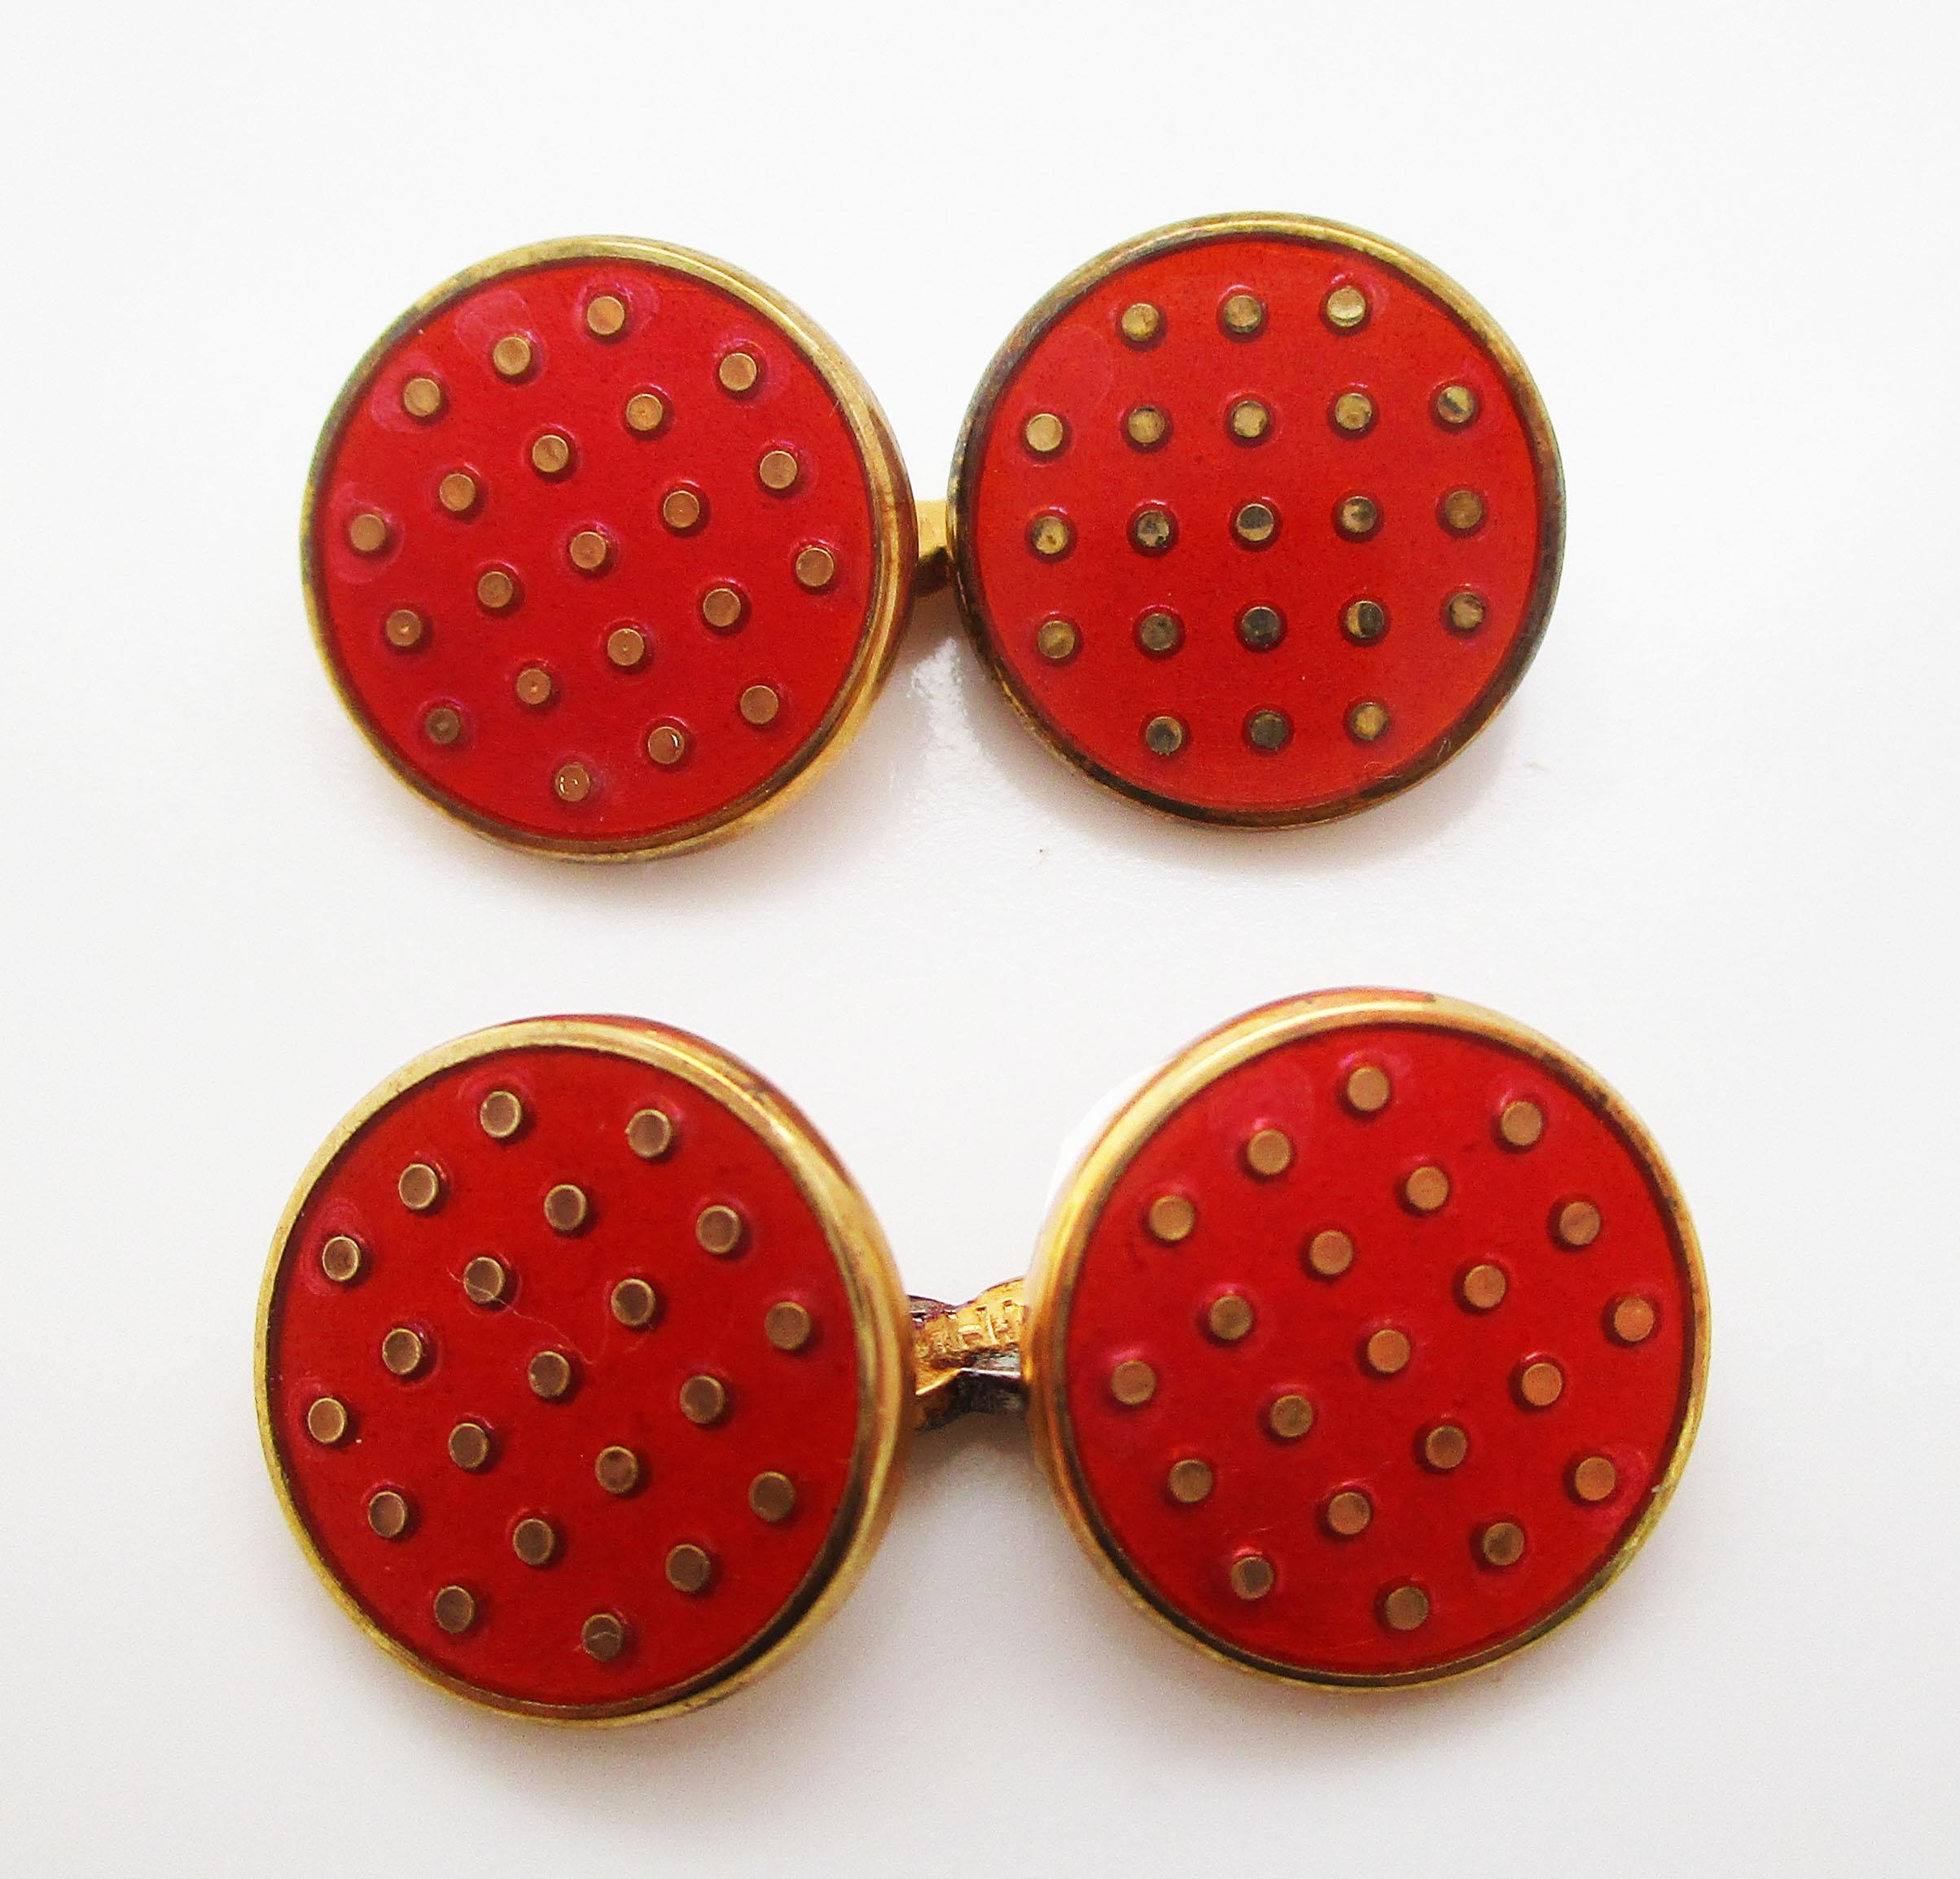 This is a gorgeous pair of contemporary cufflinks in vermeille with a  bright and sophisticated red enamel polka dot pattern. The links have a simple round shape accented by a gold border that separates the enamel panel from the sleeve upon which it